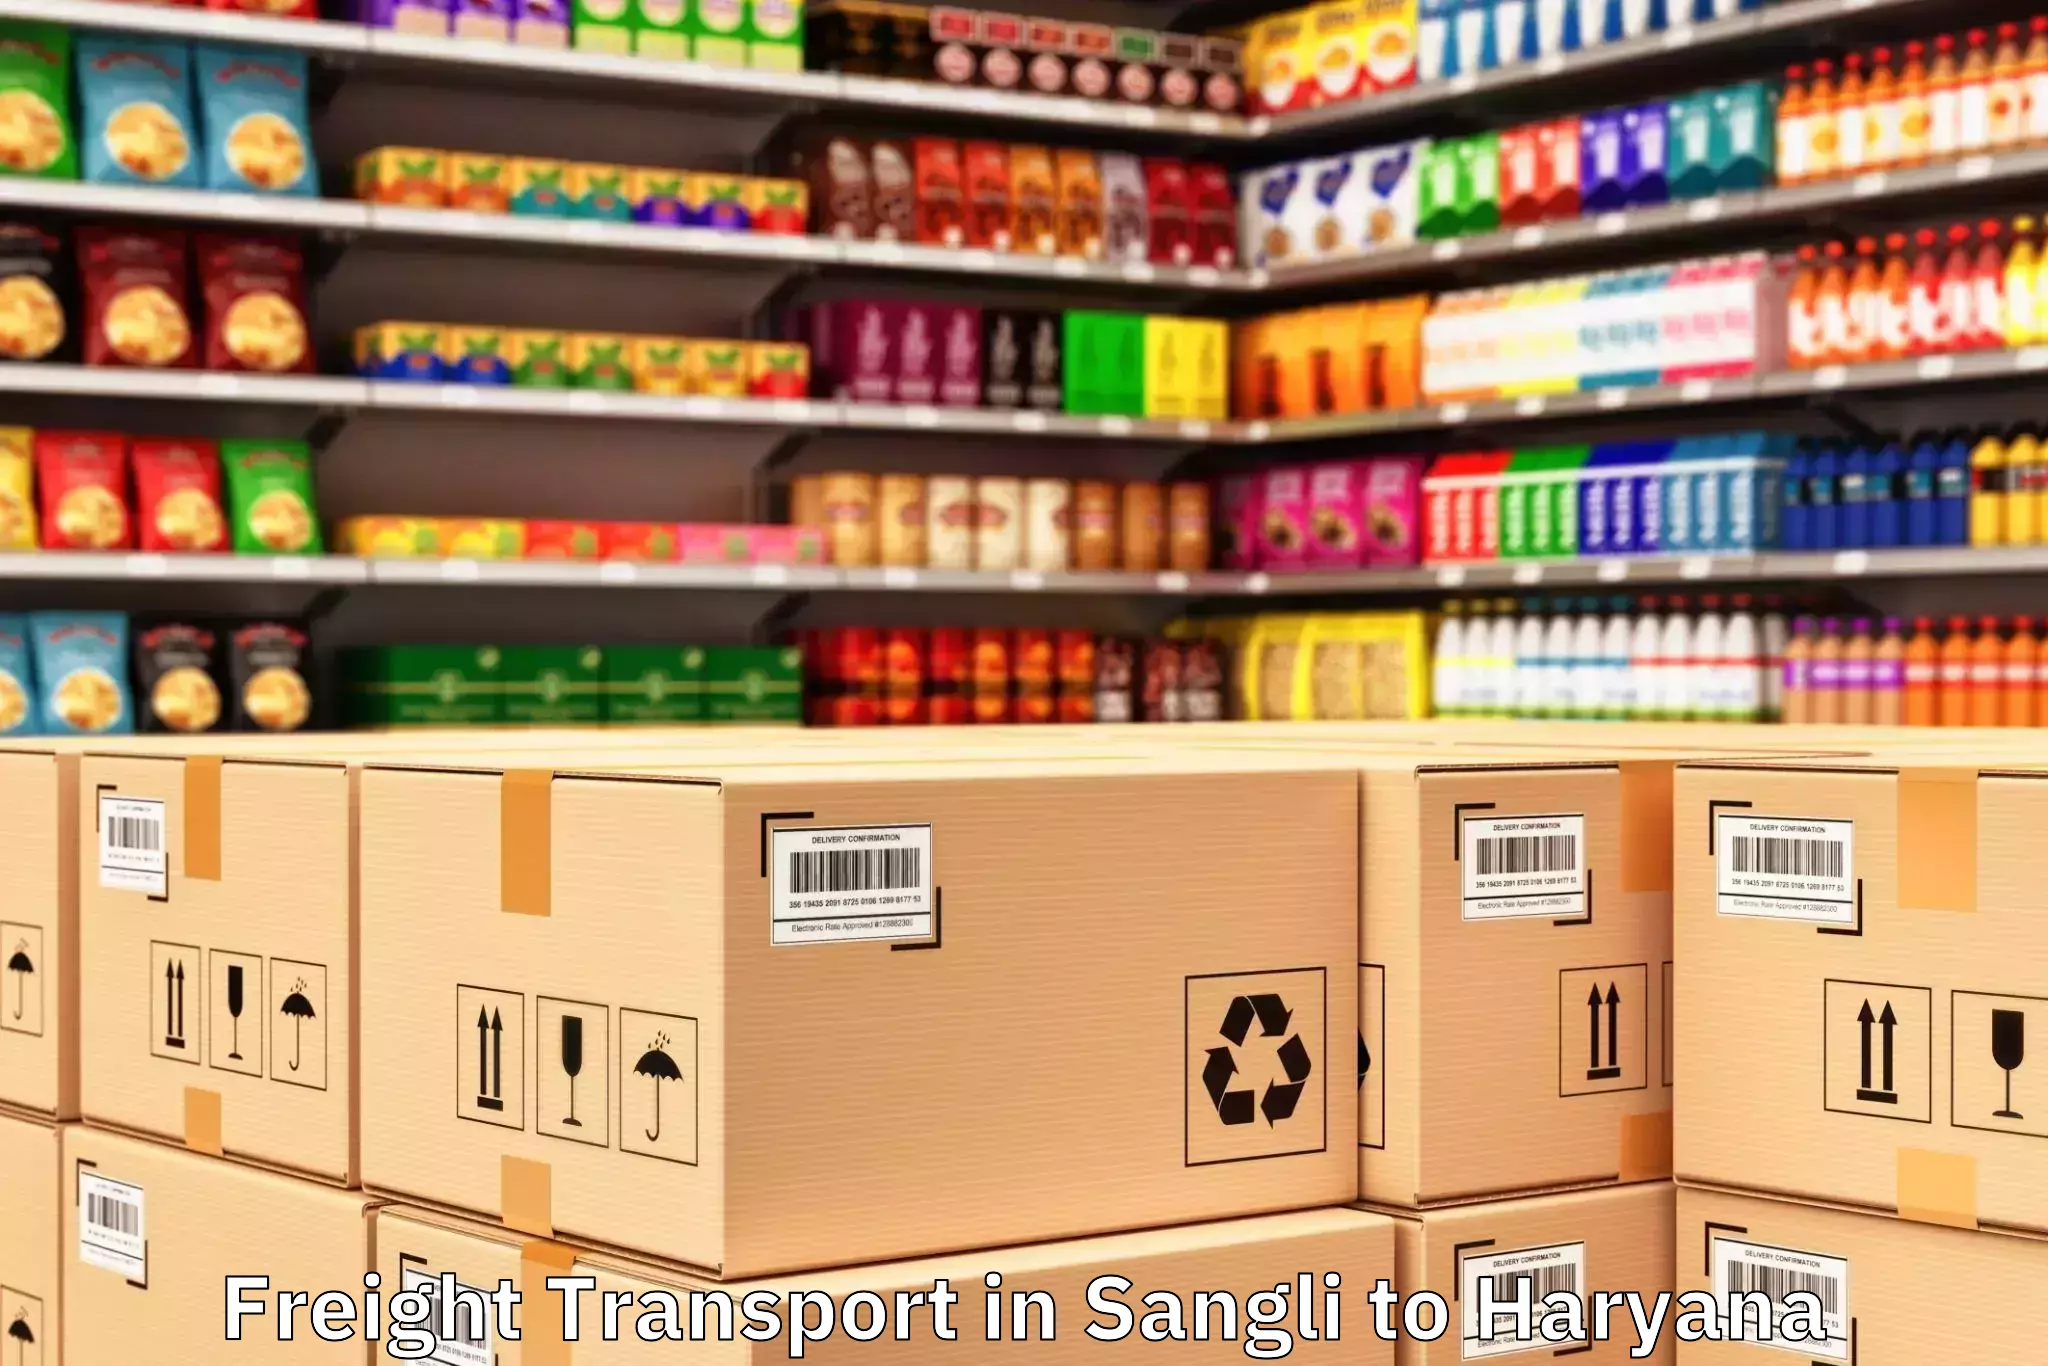 Trusted Sangli to Haryana Freight Transport